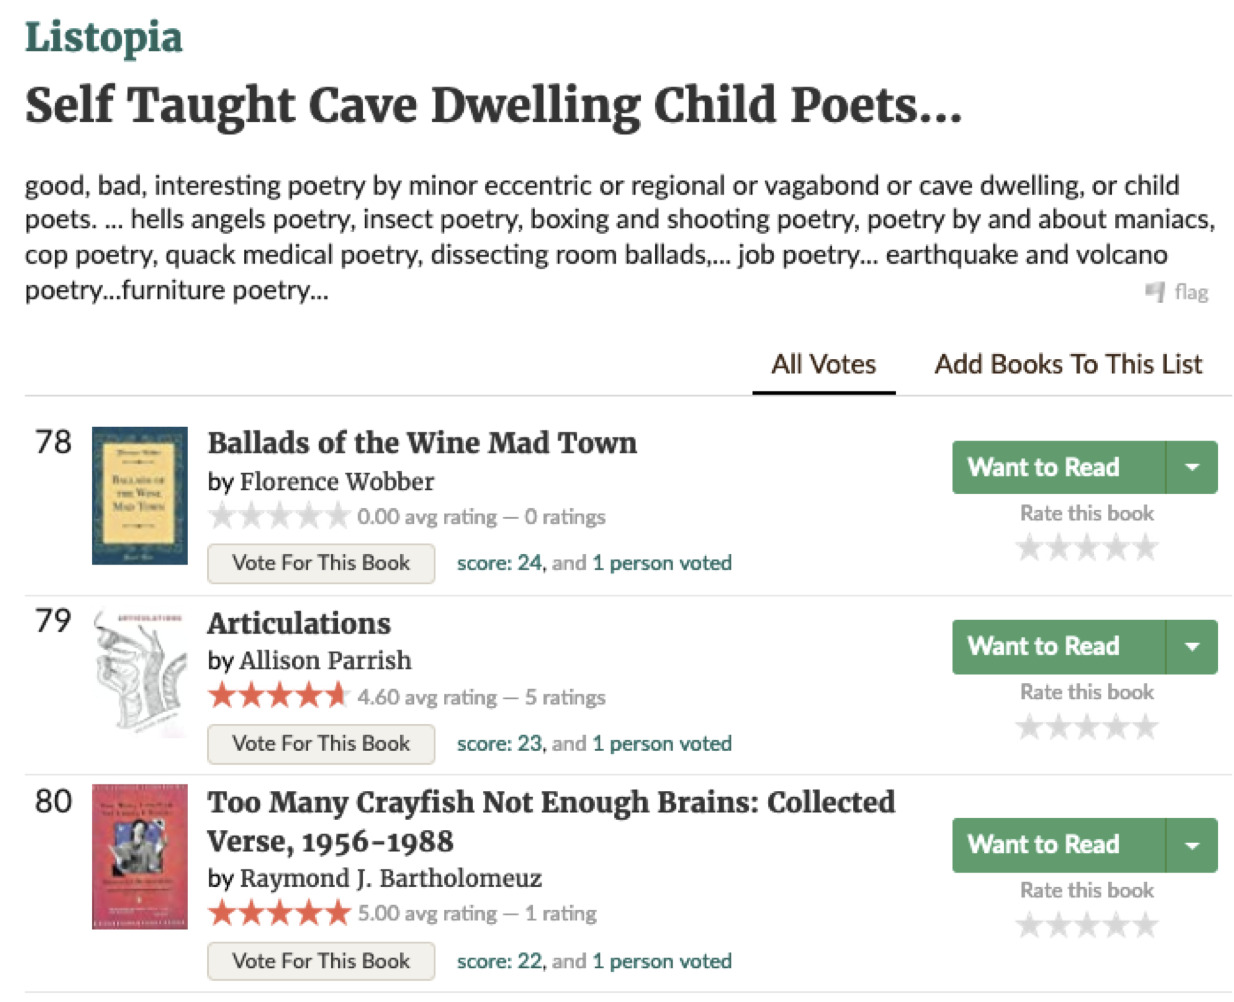 Goodreads screenshot, showing Articulations in a list called “Self Taught Cave Dwelling Child Poets”